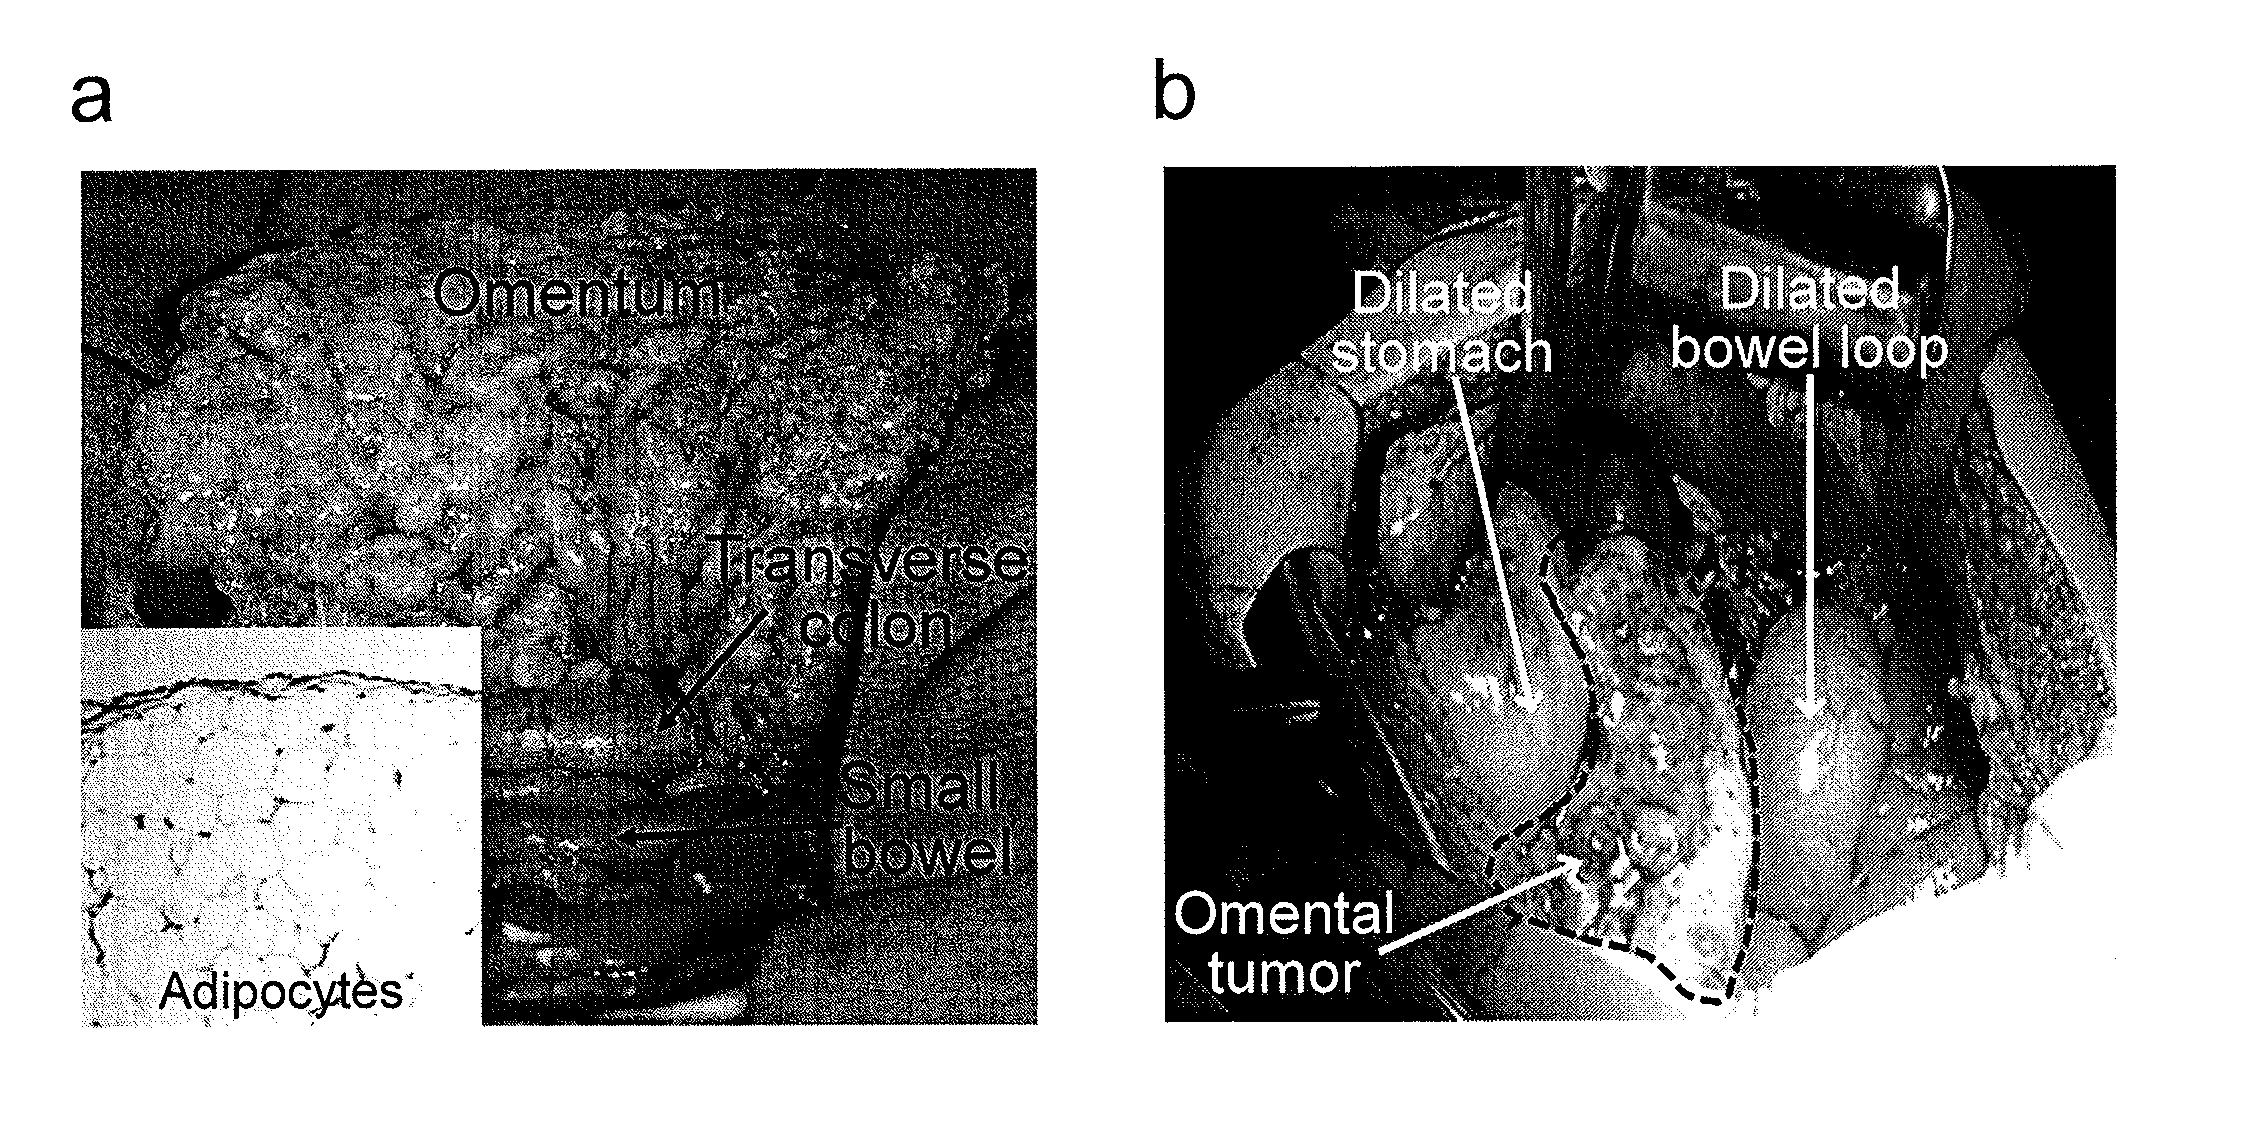 Methods for treating ovarian cancer by inhibiting fatty acid binding proteins